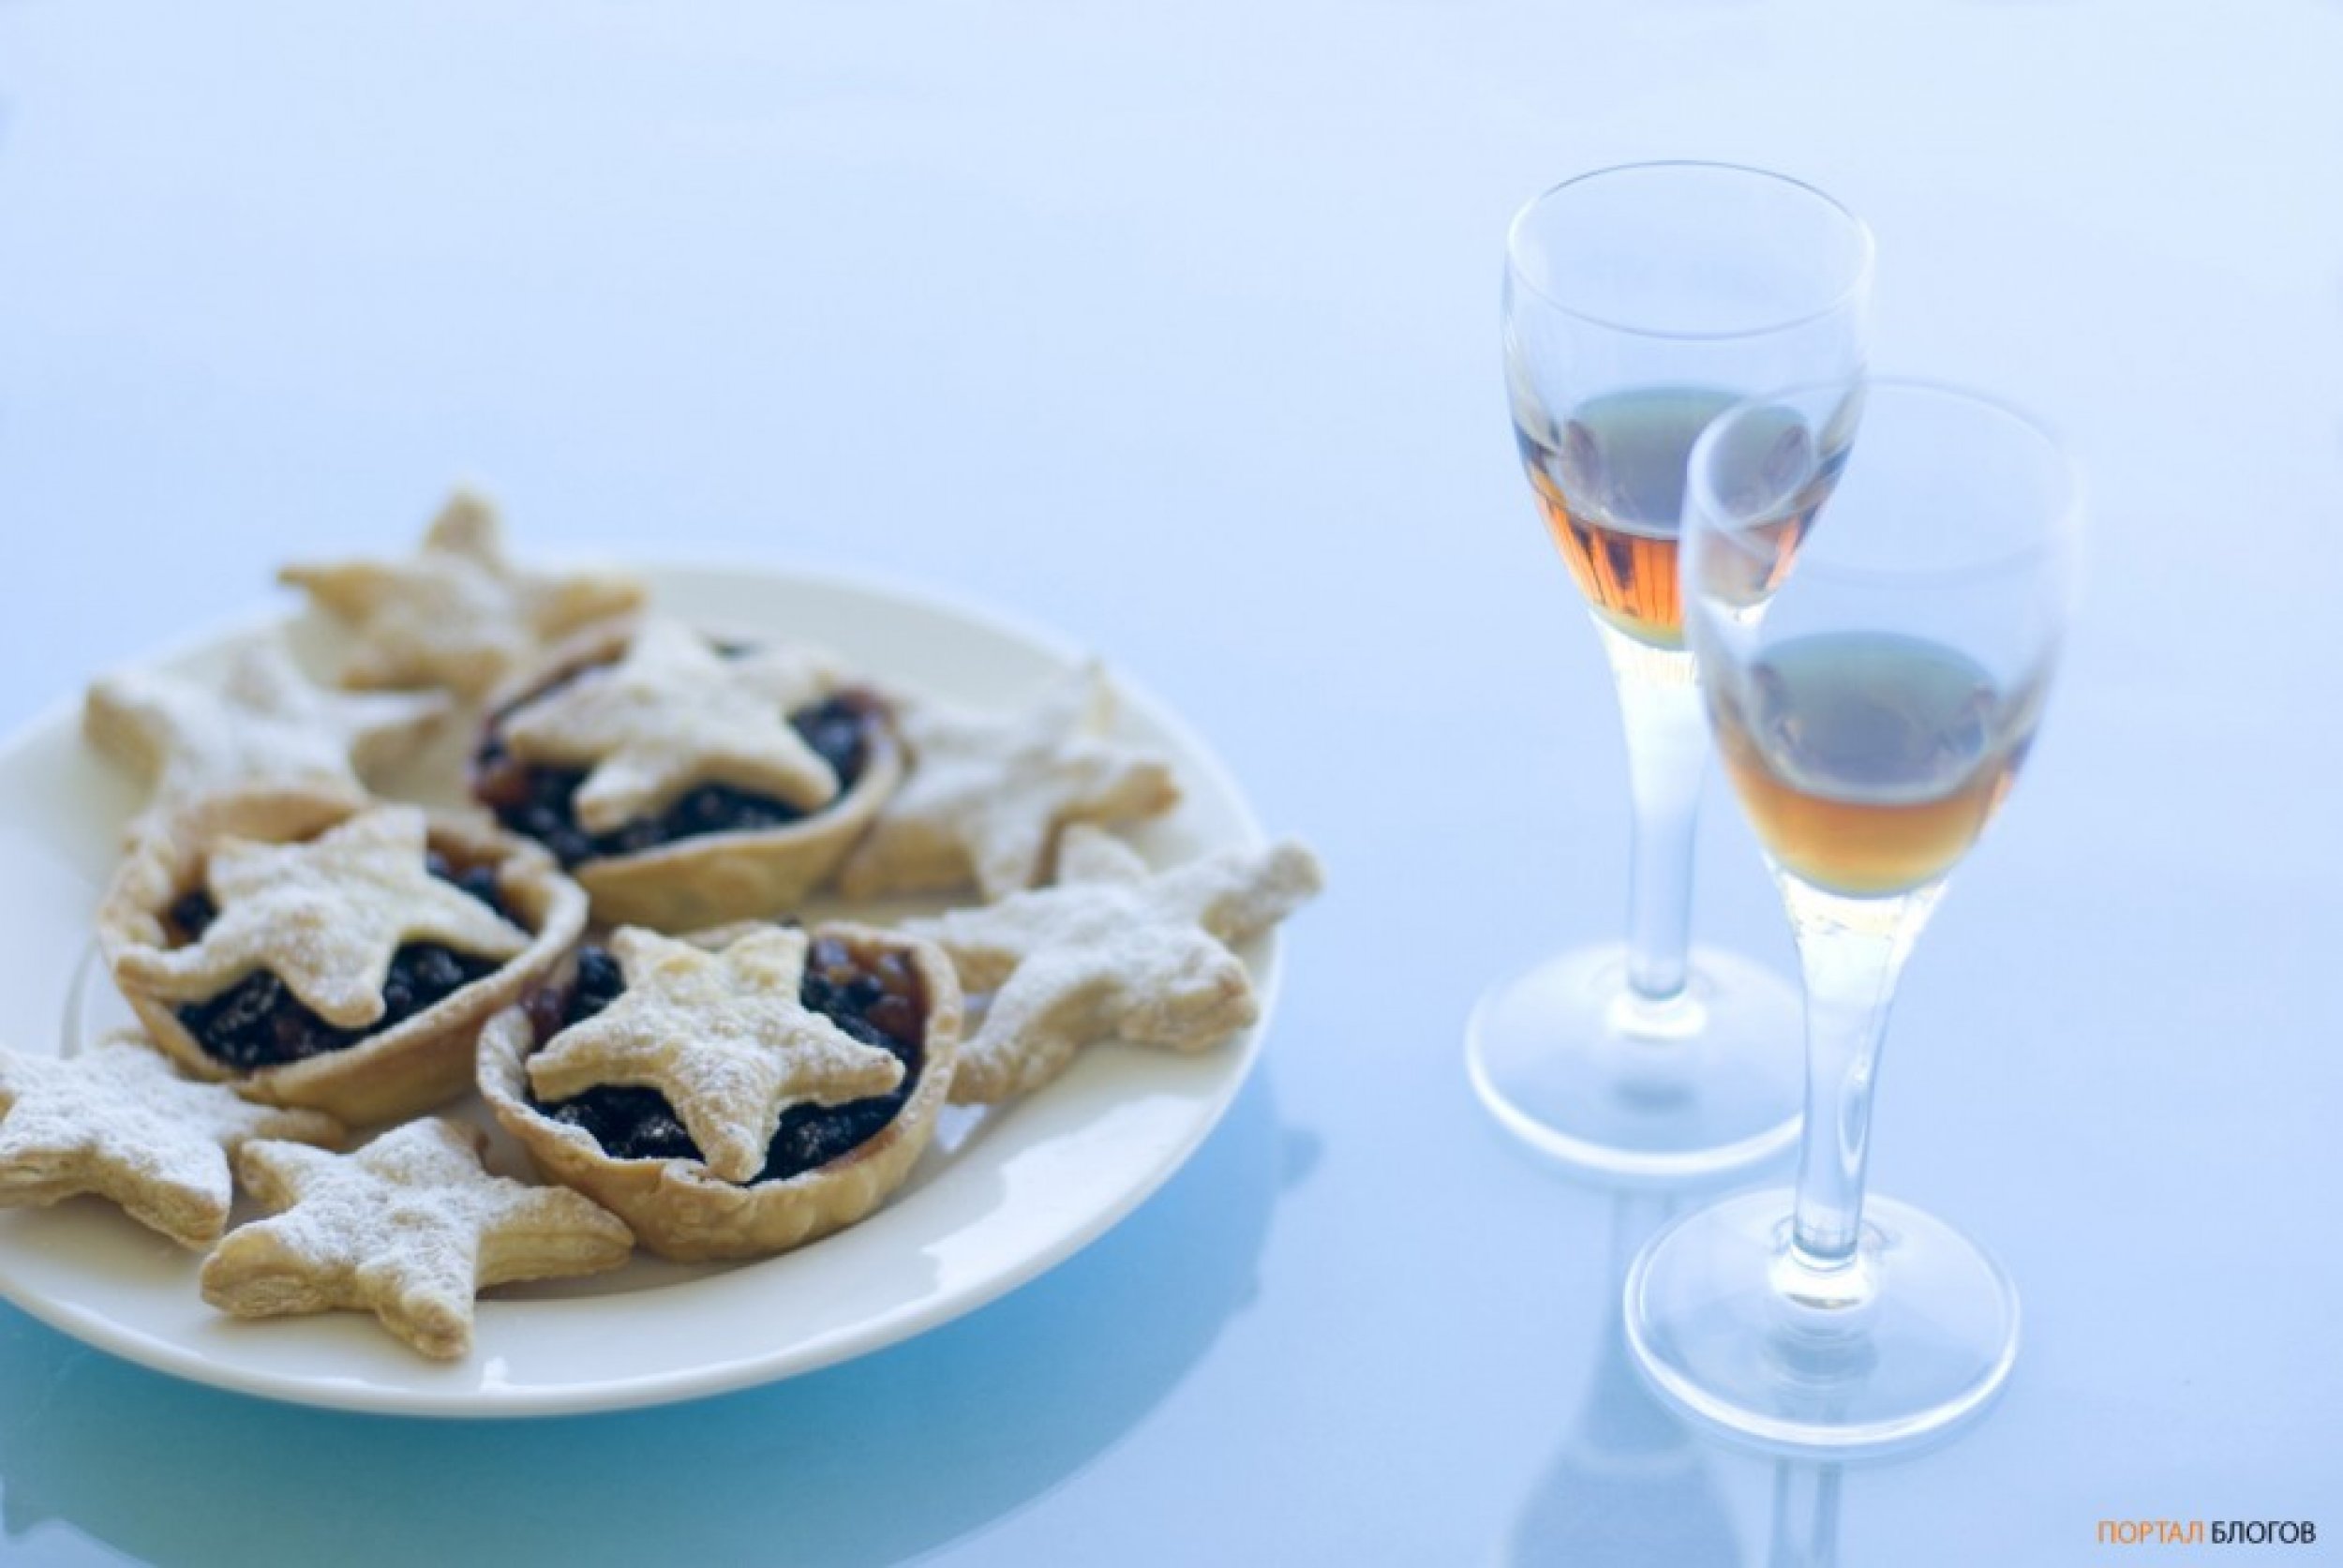 Australian and UK Santa Claus Sherry and Mince Pies